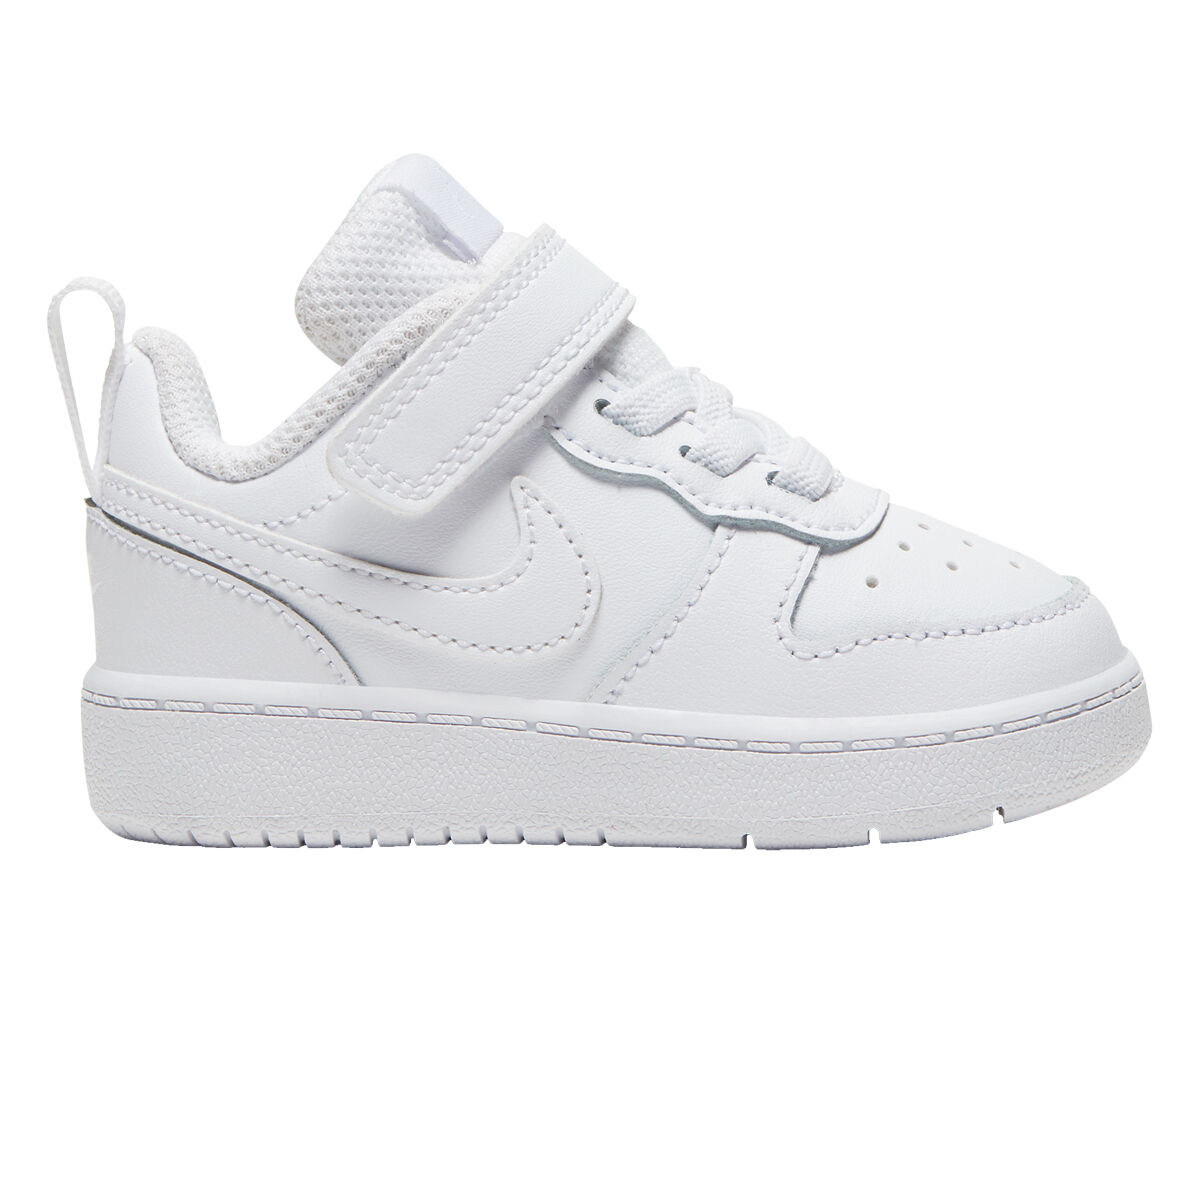 white nike youth shoes